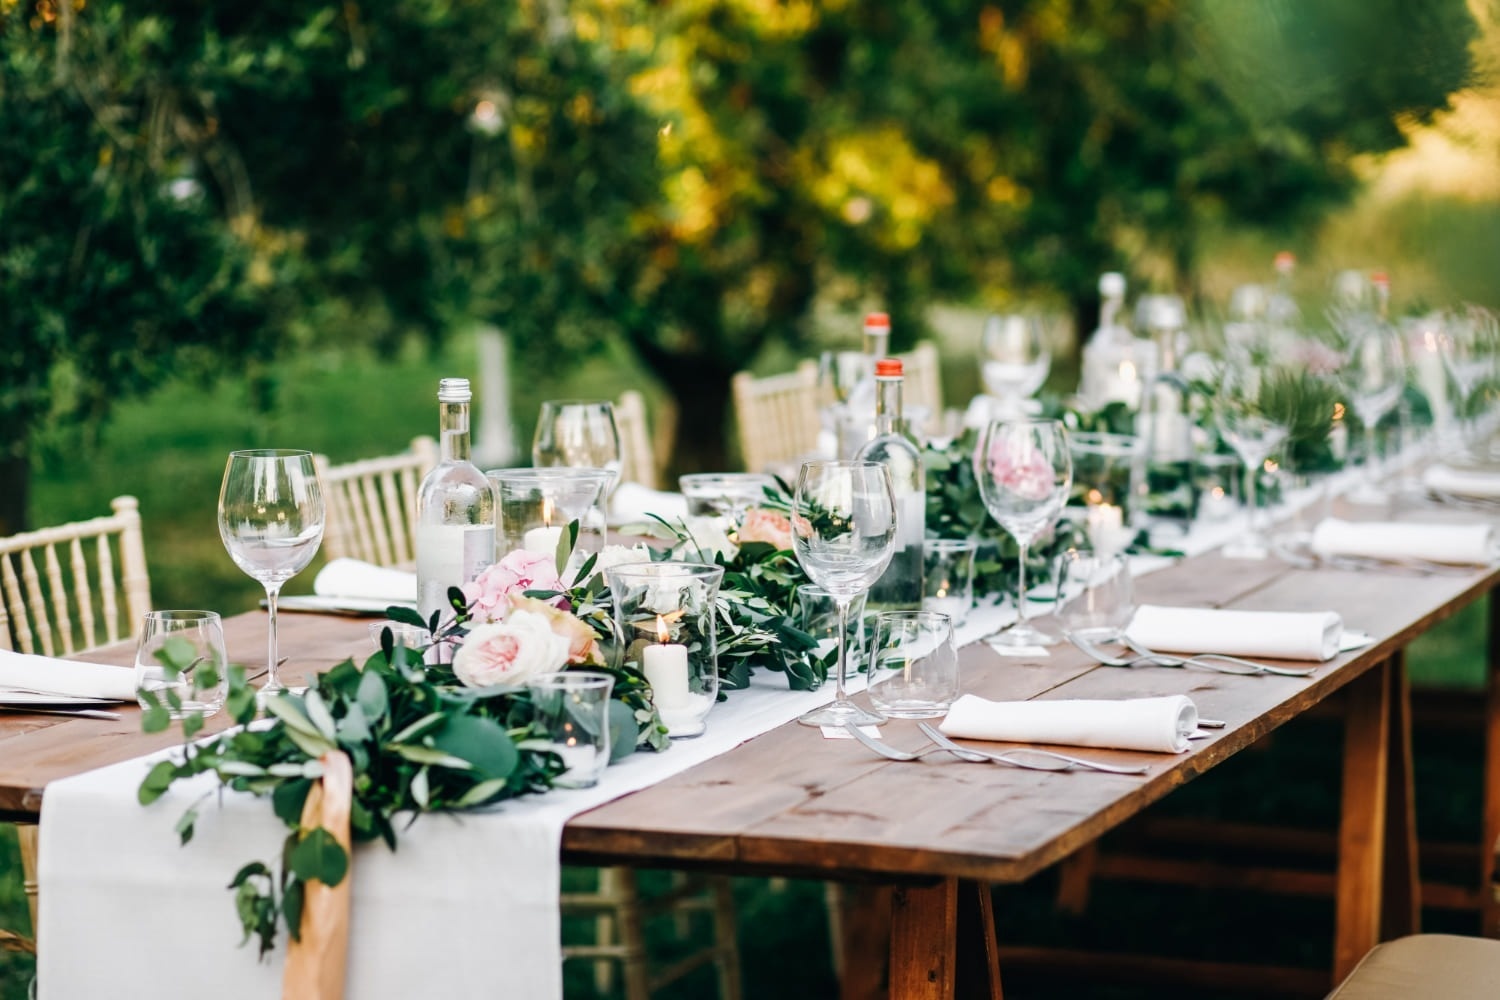 Tips for celebrating your outdoor wedding